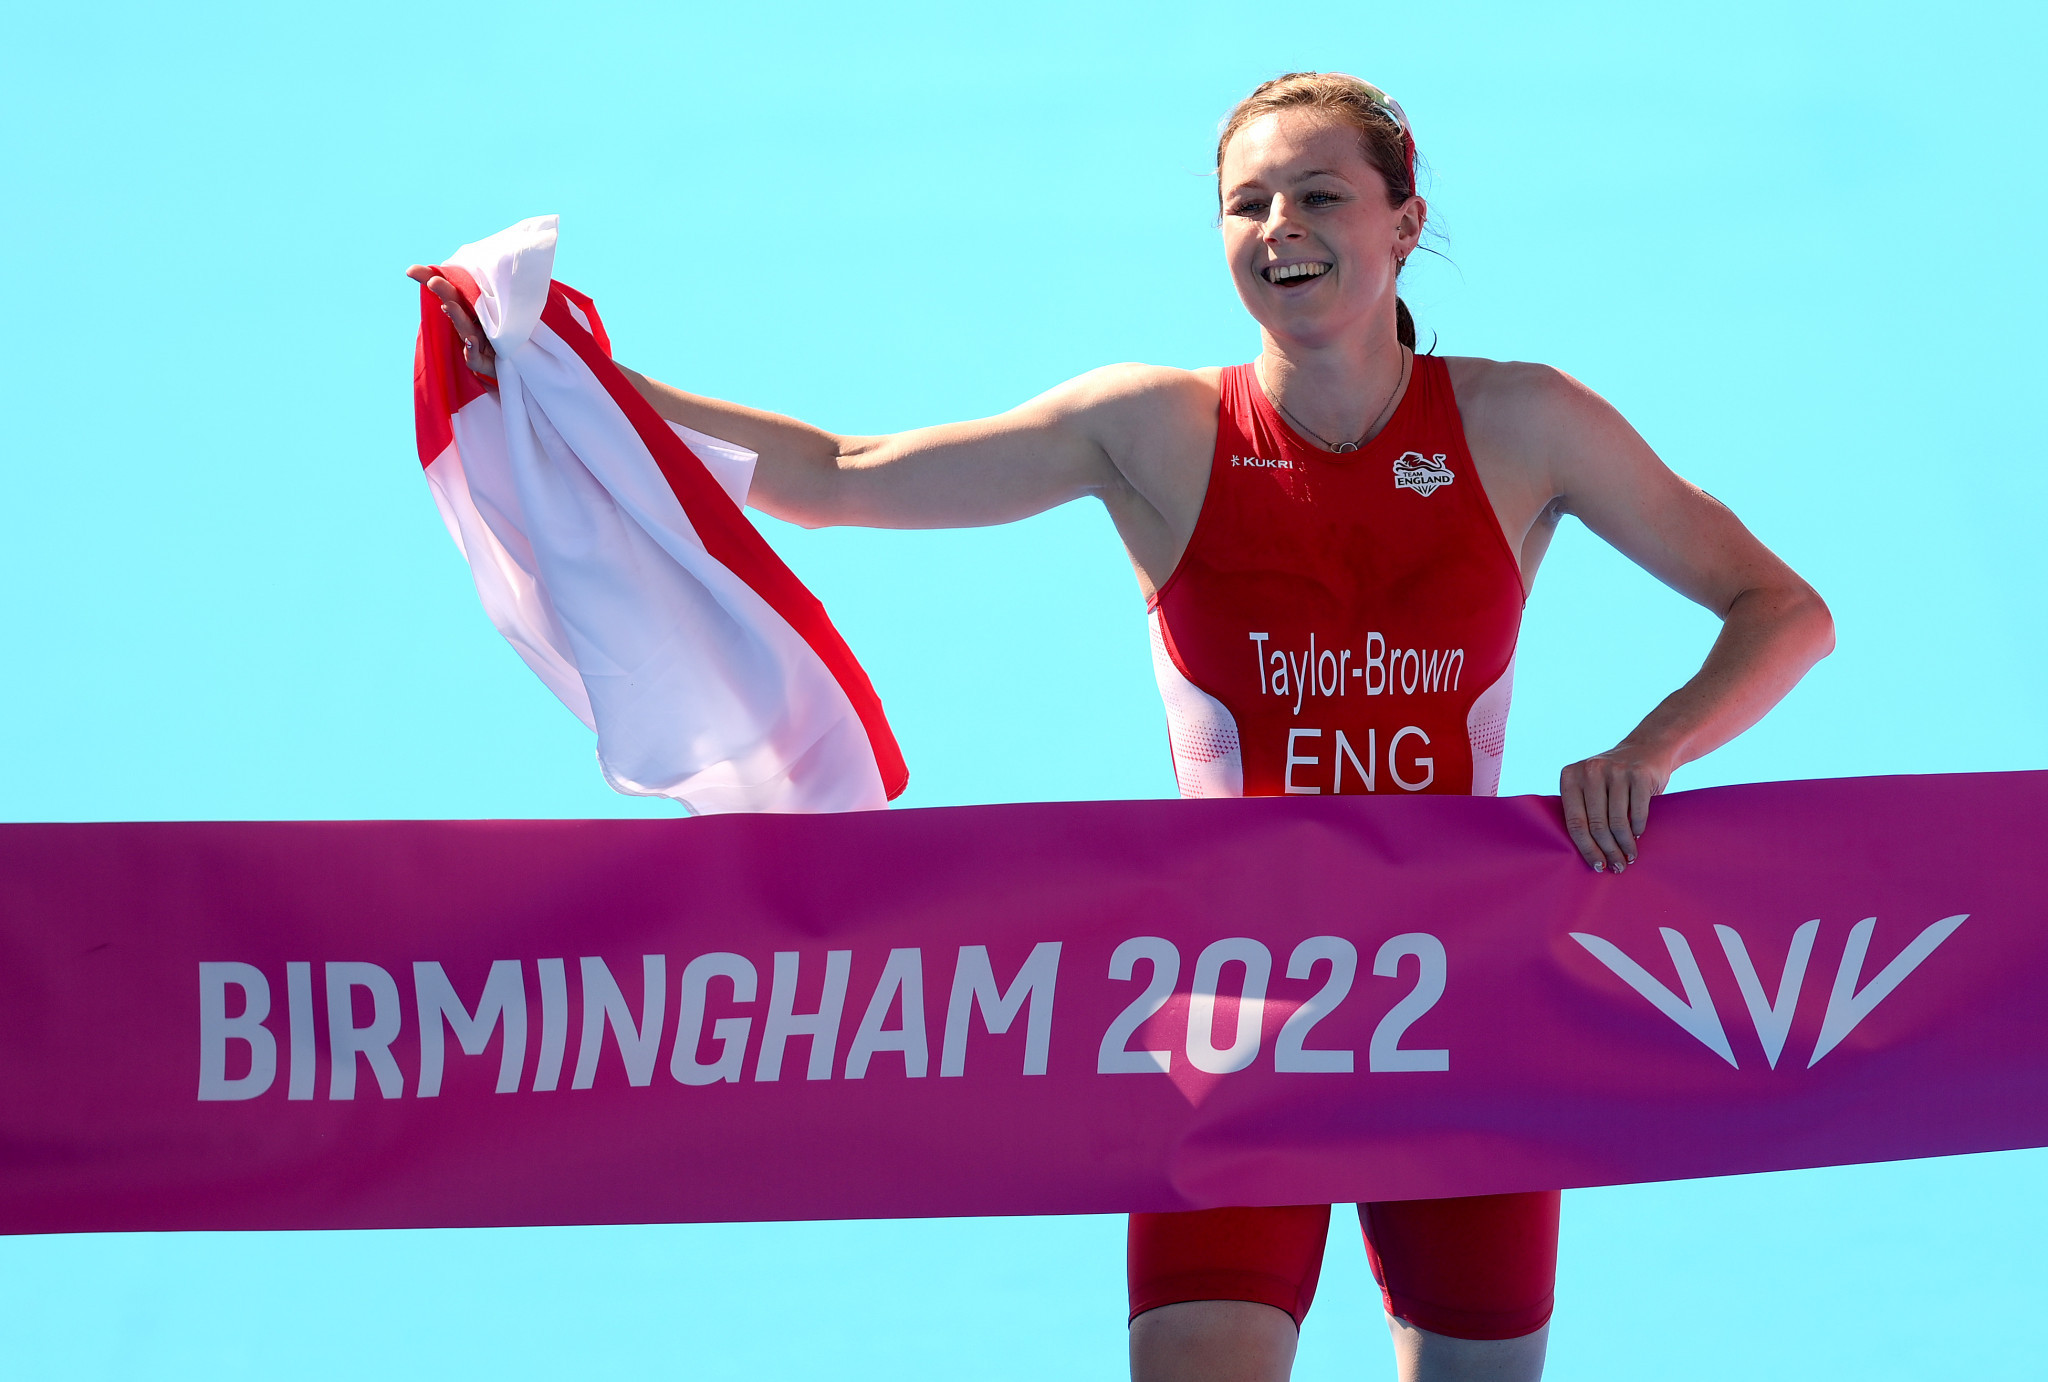 Georgia Taylor-Brown anchored England's mixed team triathlon team to gold at Sutton Park ©Getty Images